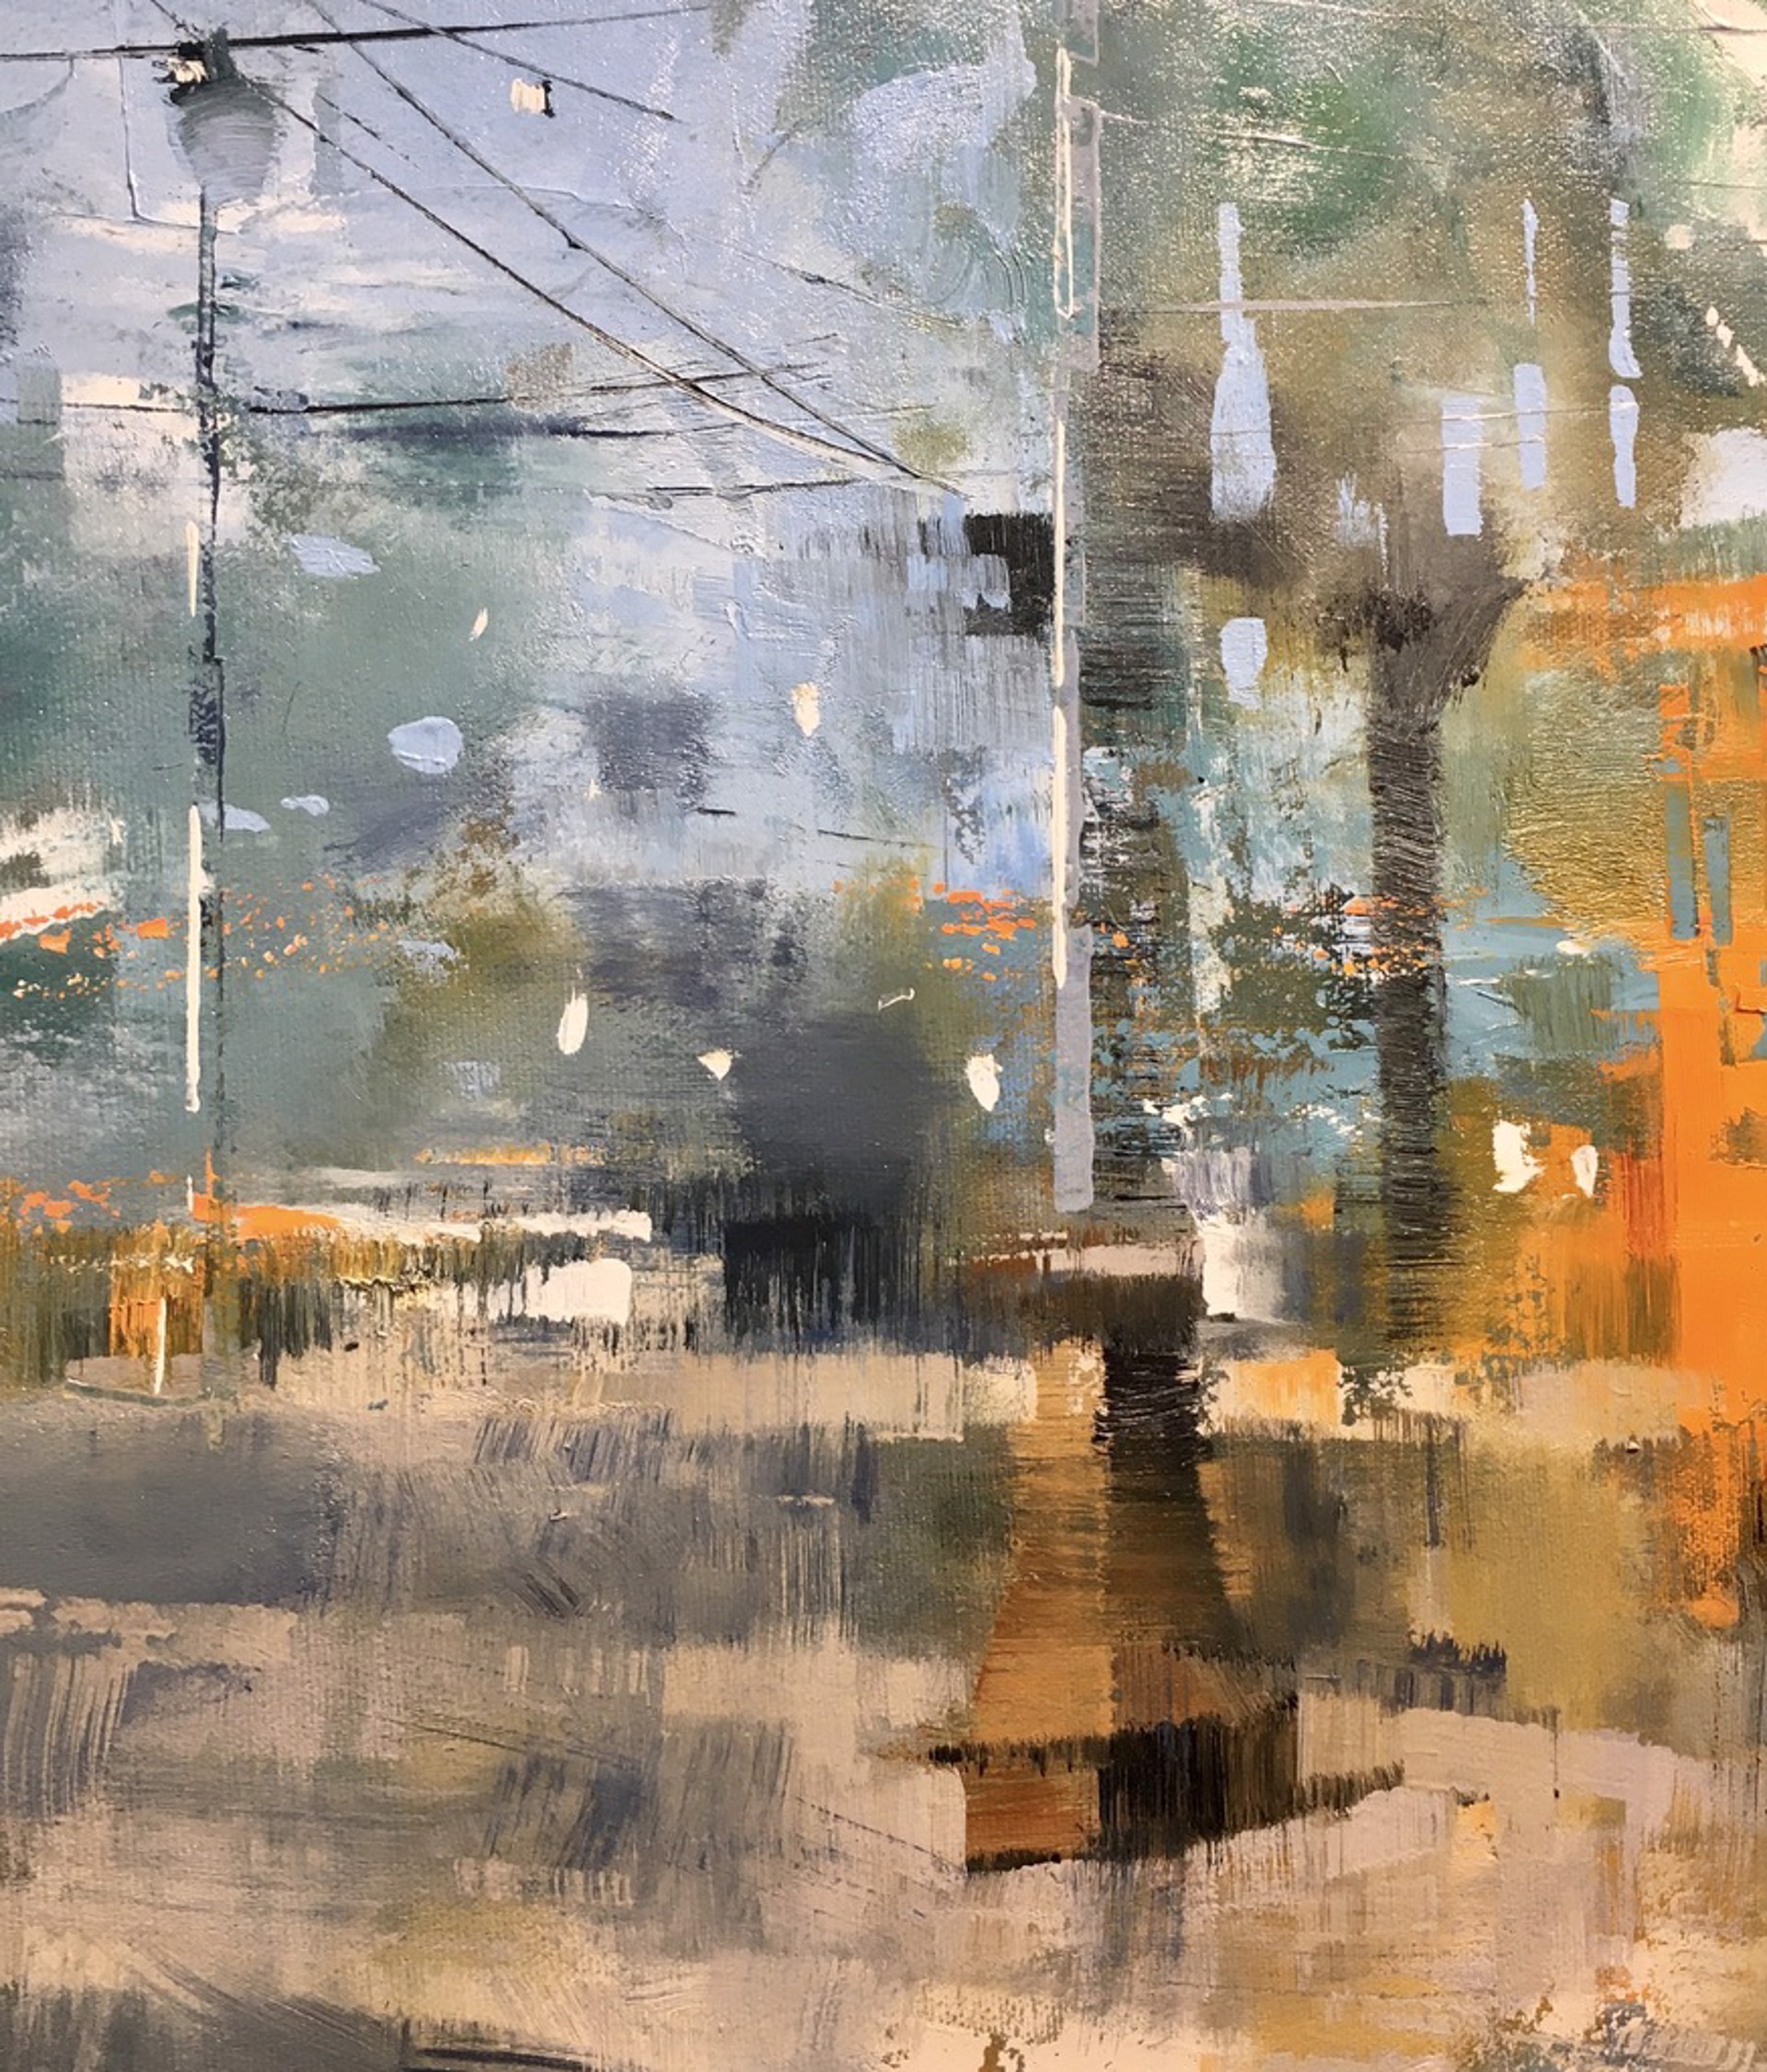 Two Trolleys by MARK LAGUE